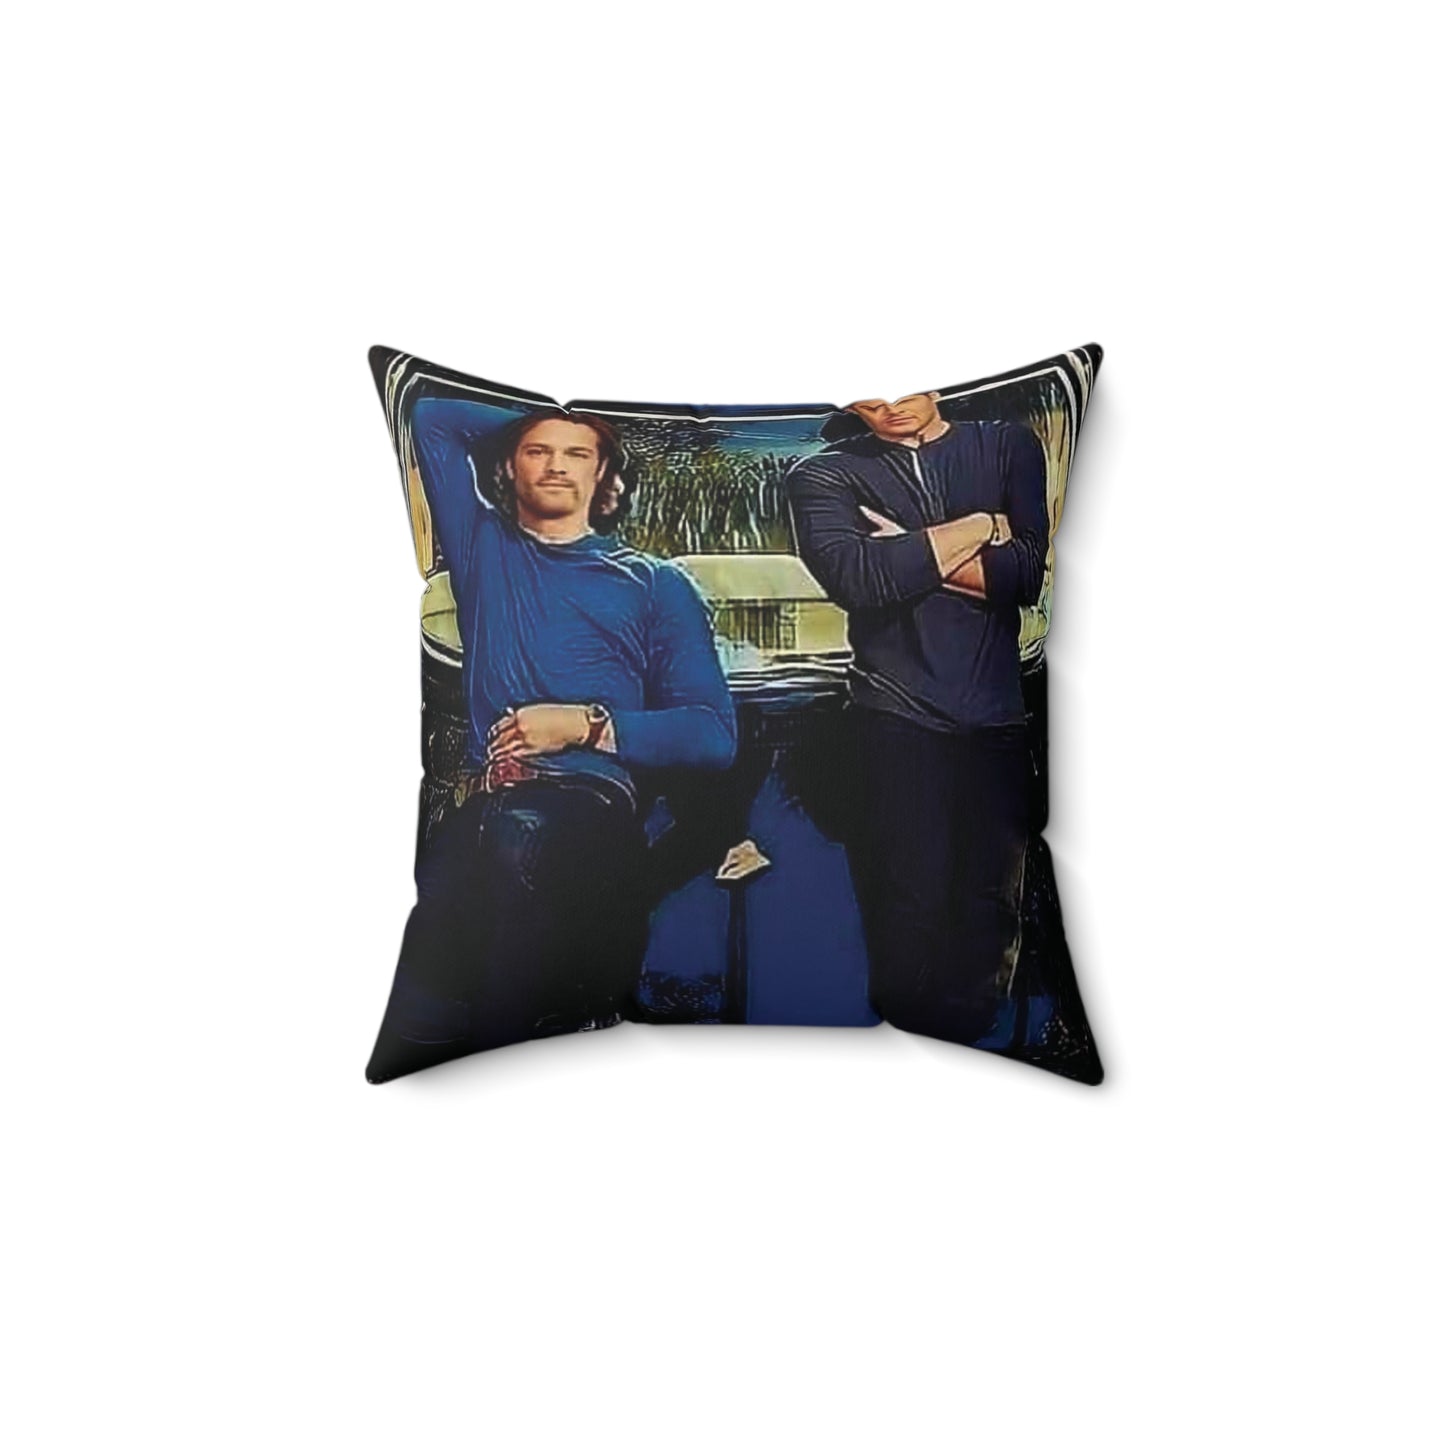 Brother impala love Square Pillow